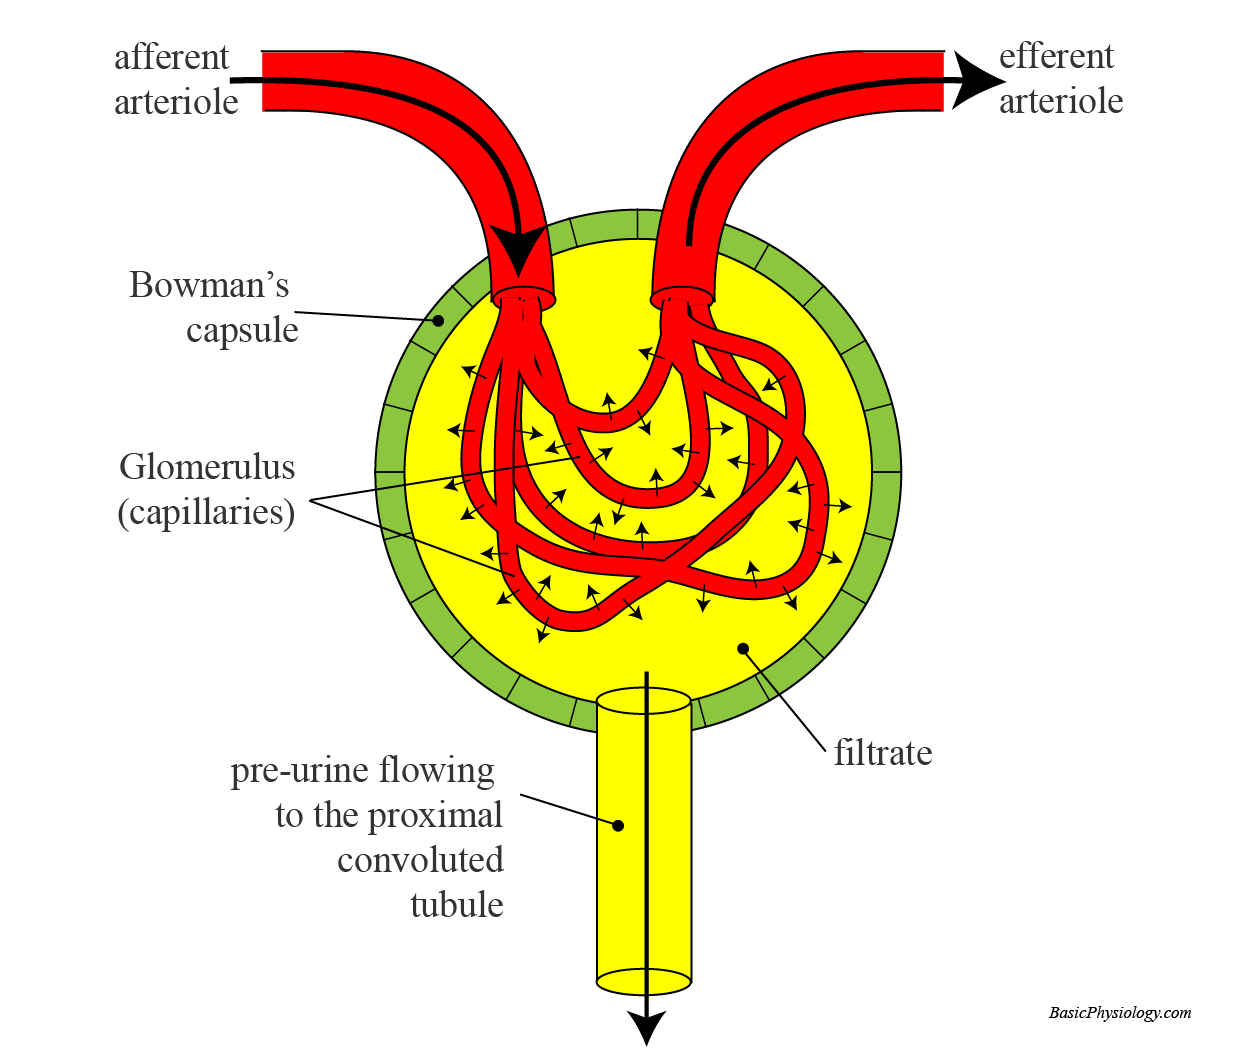 Structure of a Renal Corpuscle